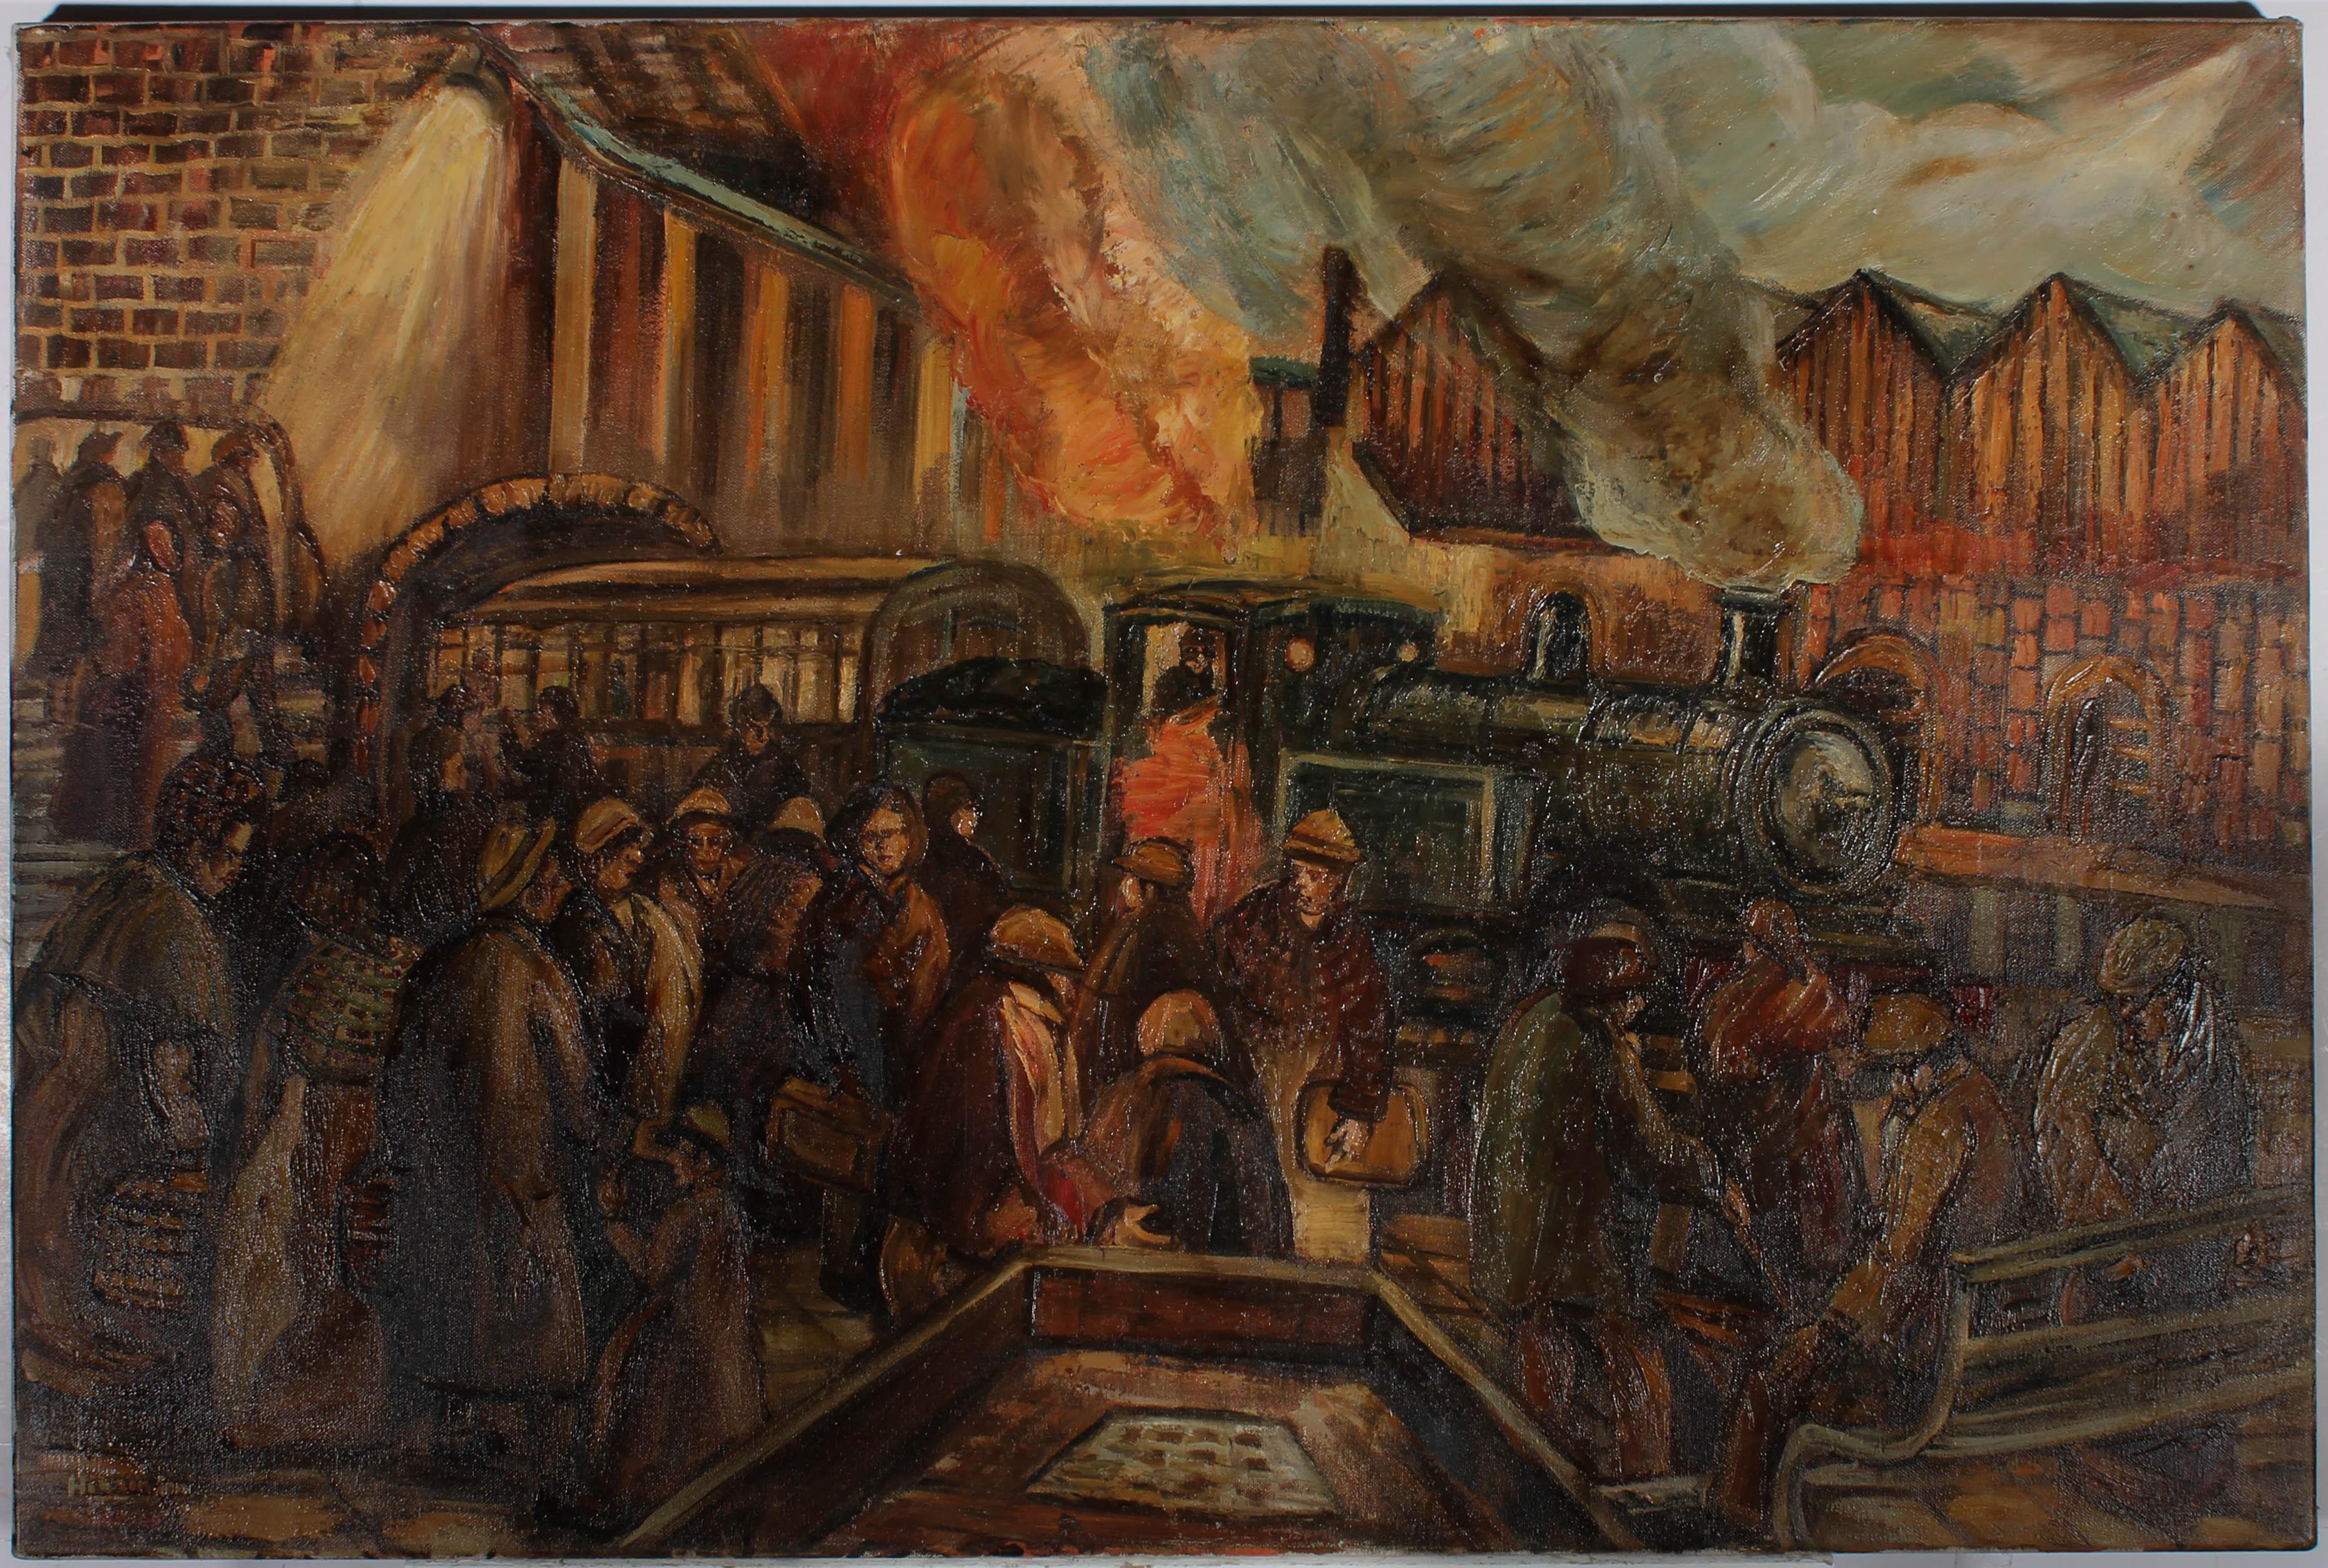 An original industrial themed oil painting by Derek Higginson, depicting a crowd of figures gathered on a busy station planform. Many of the figures seem eager to bored the evening steam train, positioning themselves as close as possible to the